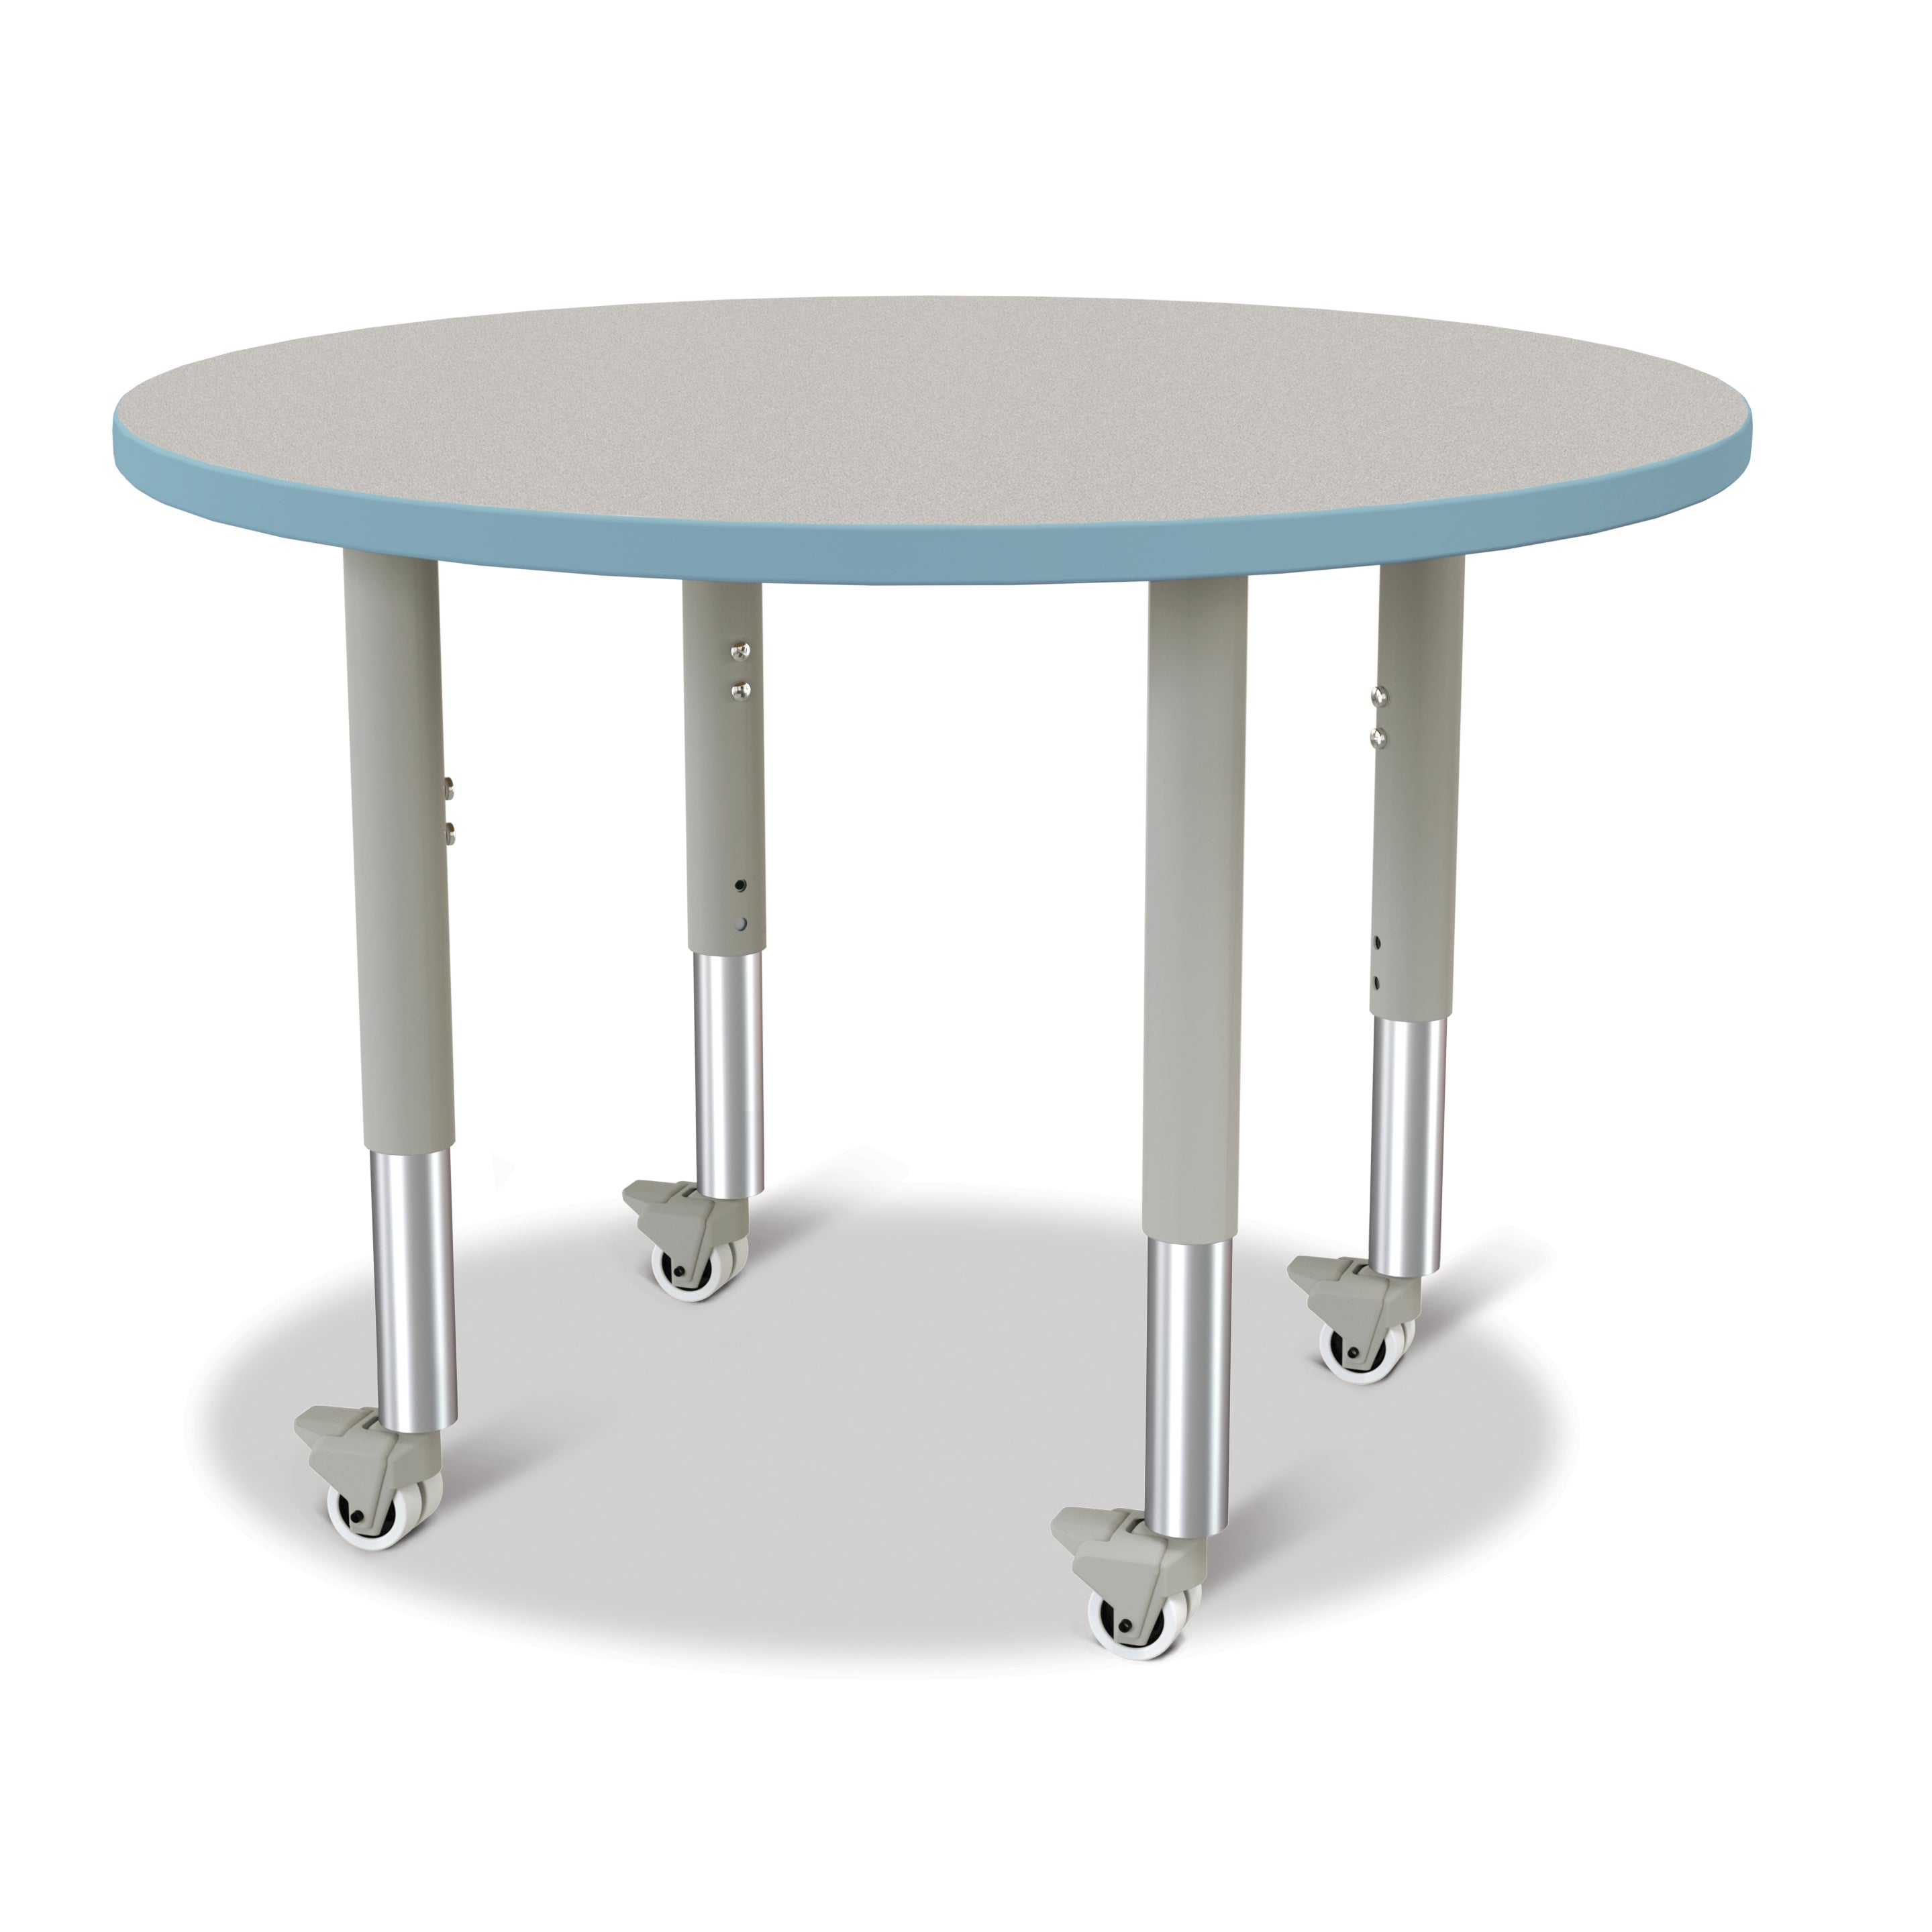 6488JCM131, Berries Round Activity Table - 36" Diameter, Mobile - Freckled Gray/Coastal Blue/Gray